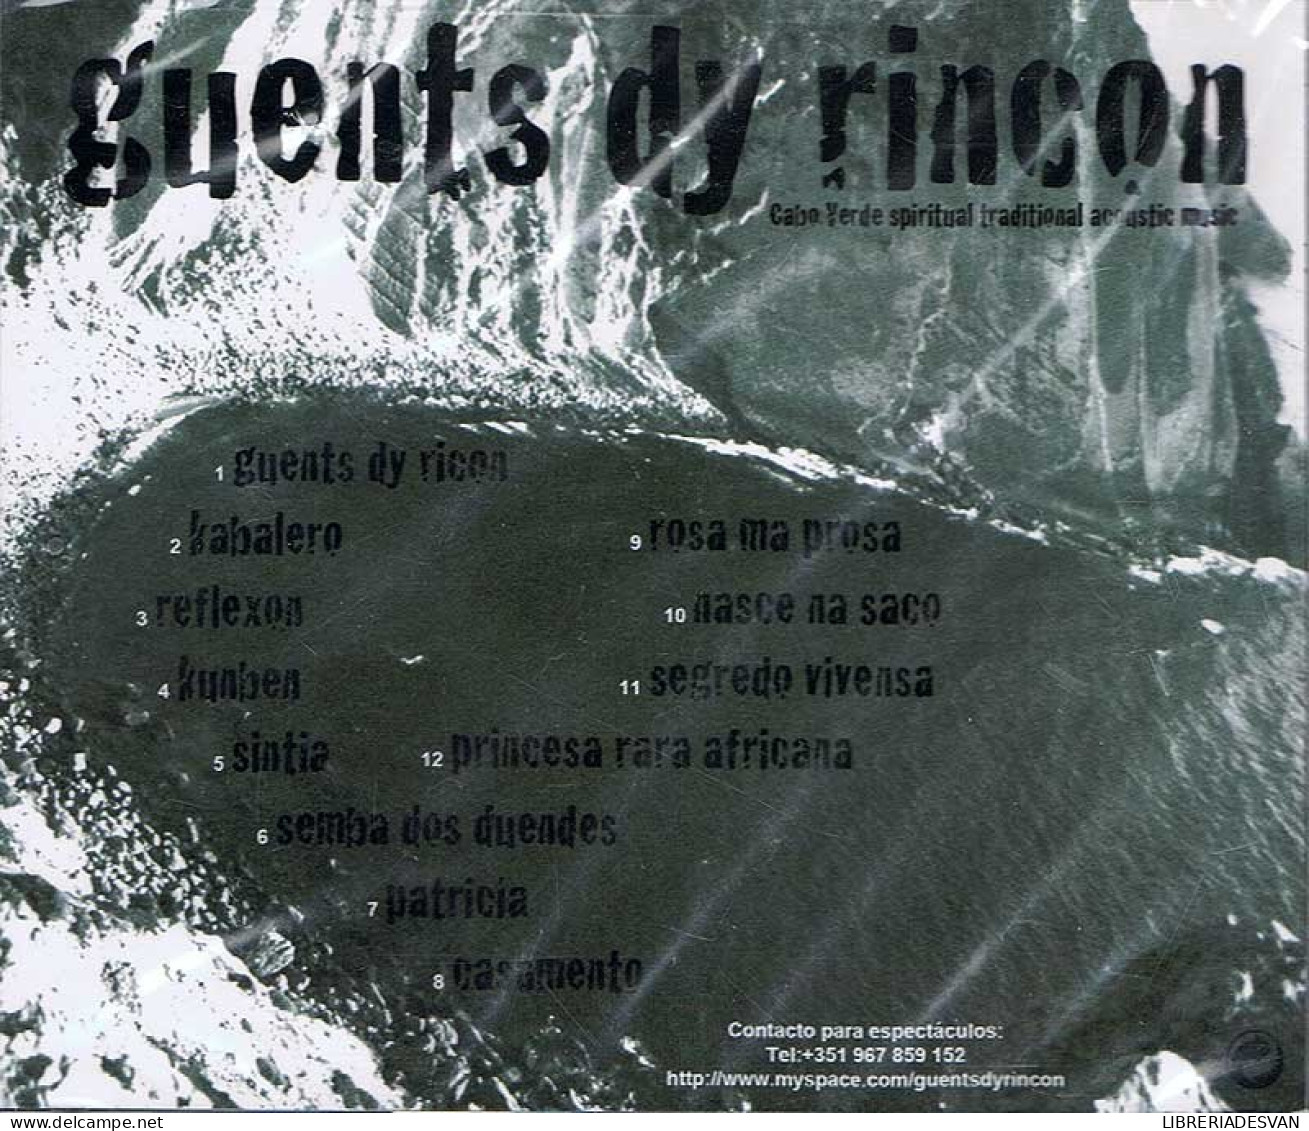 Guents Dy Rincon - Cabo Verde Spiritual Traditional Acoustic Music. CD - Country & Folk